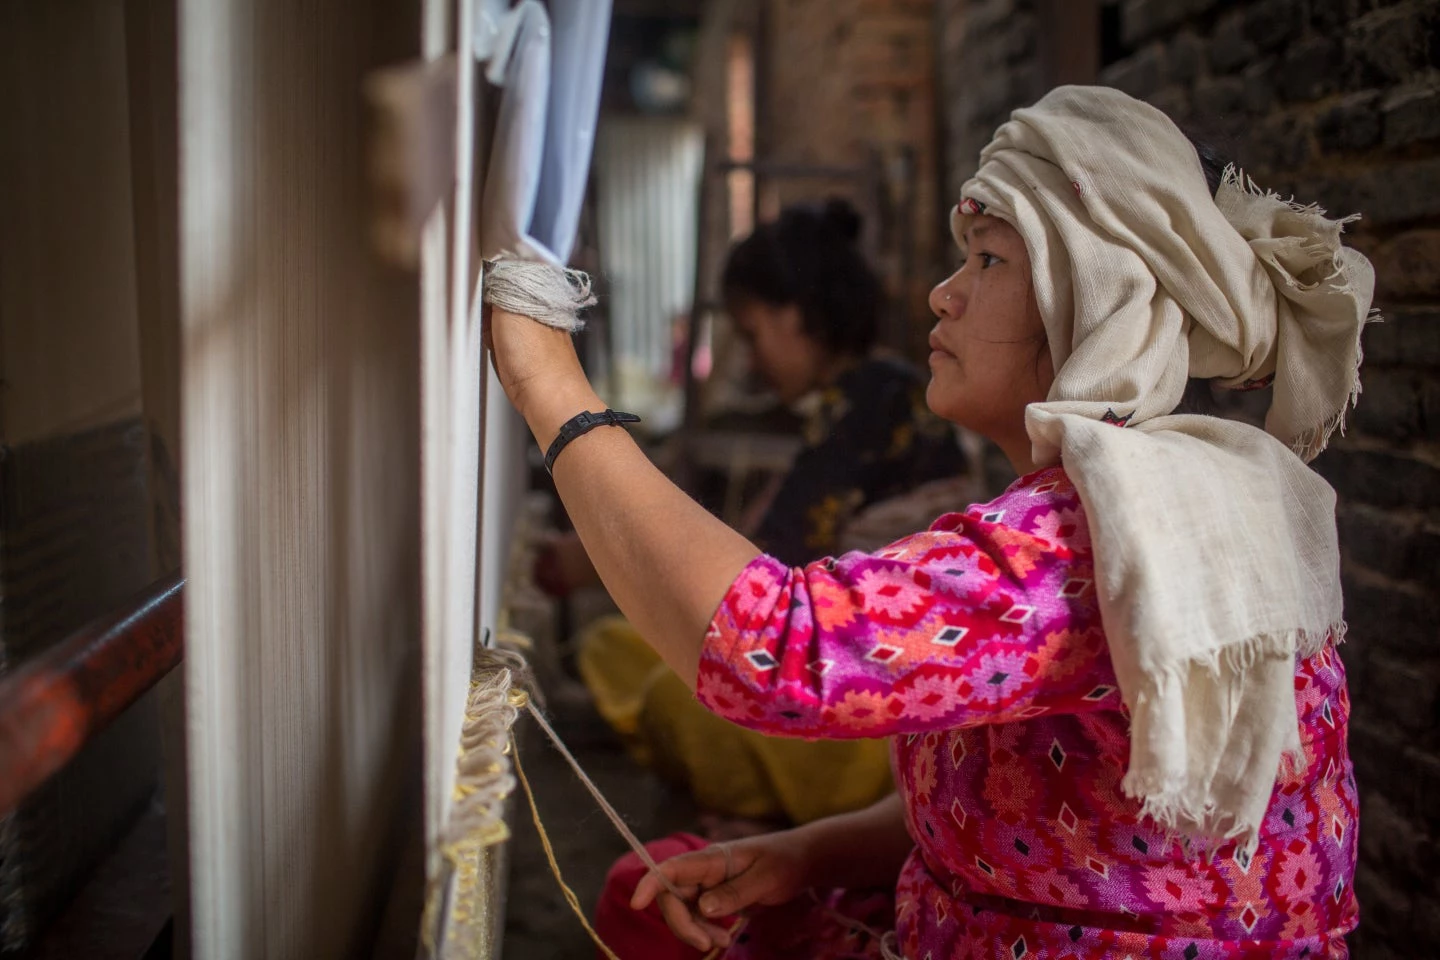 A woman works Nepal's export-oriented factory. Photo: World Bank/Nabin Baral